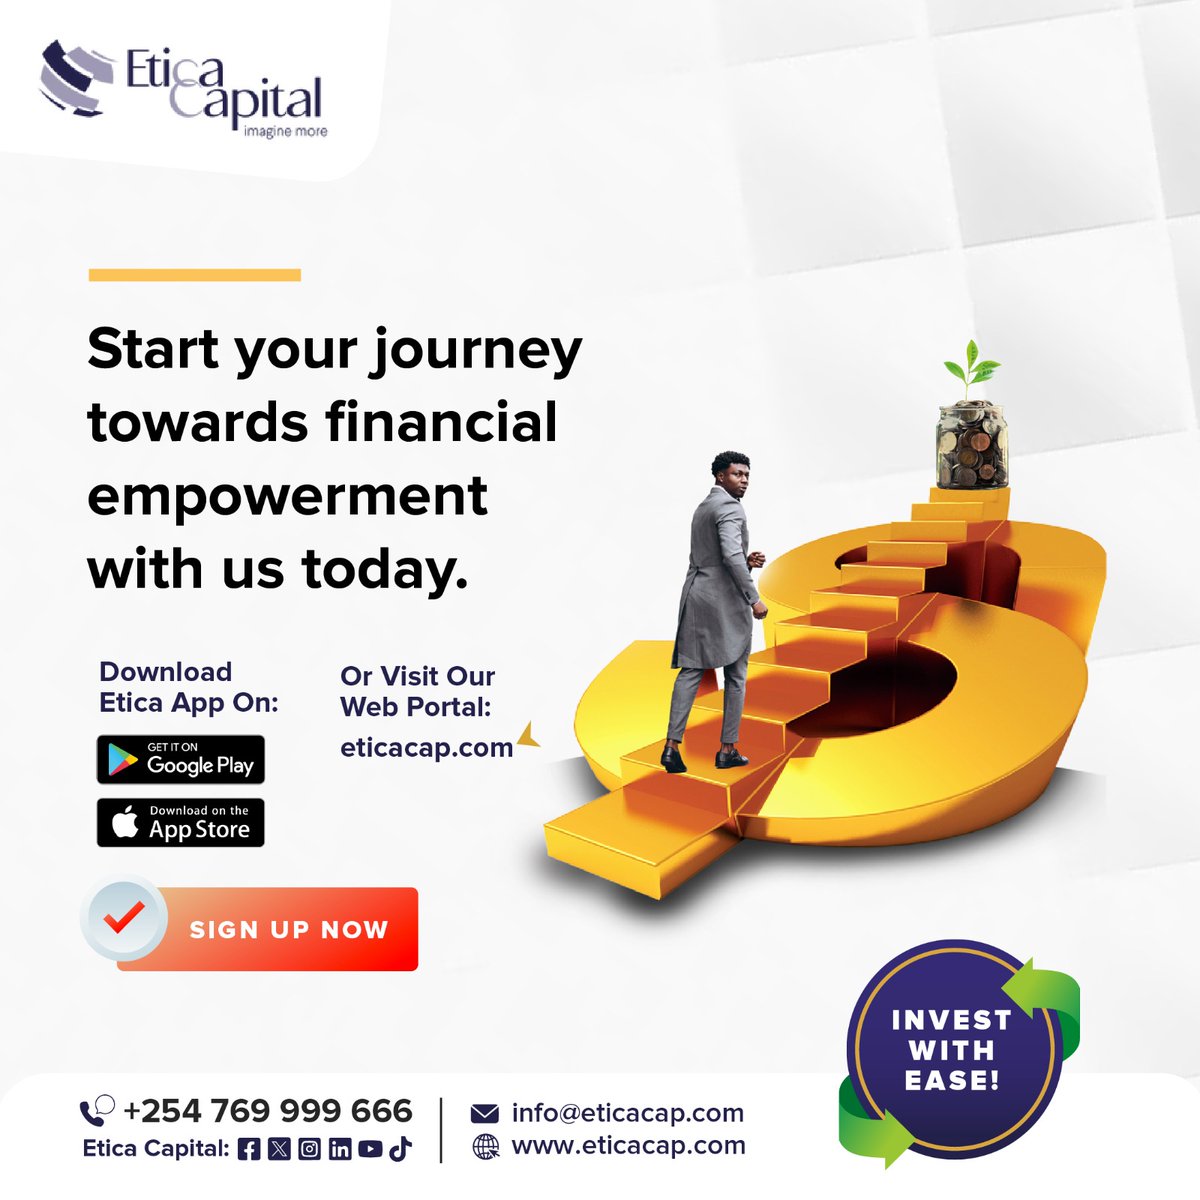 Start your journey towards financial empowerment with us today.

Etica's diverse range of investment products are designed to cater to the needs of every investor.

Call / WhatsApp 0769 999666 or Visit eticacap.com #InvestWithEase #EticaCapital #WealthTech #Fintech